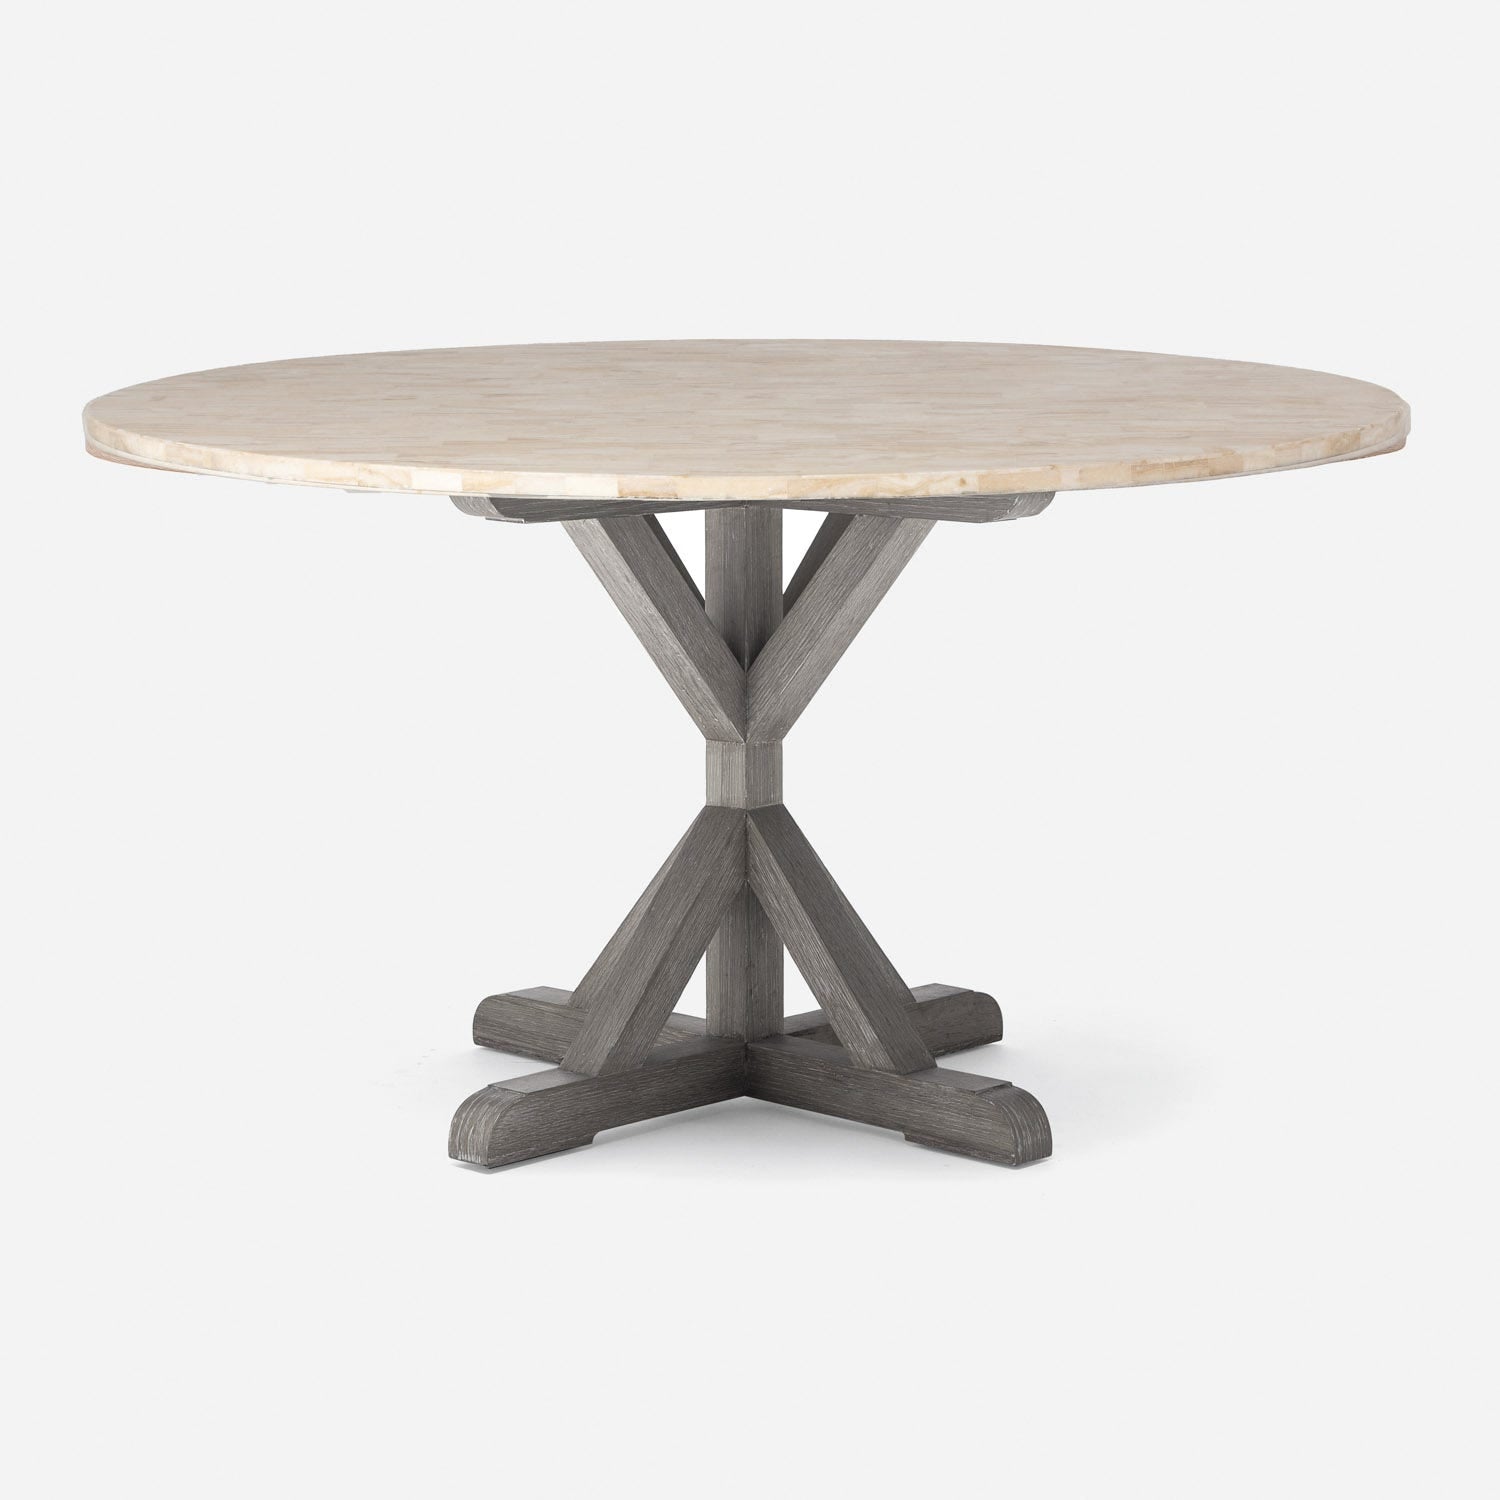 Made Goods Dane 72" x 30" White Cerused Oak Dinning Table With Round Beige Crystal Stone Table Top